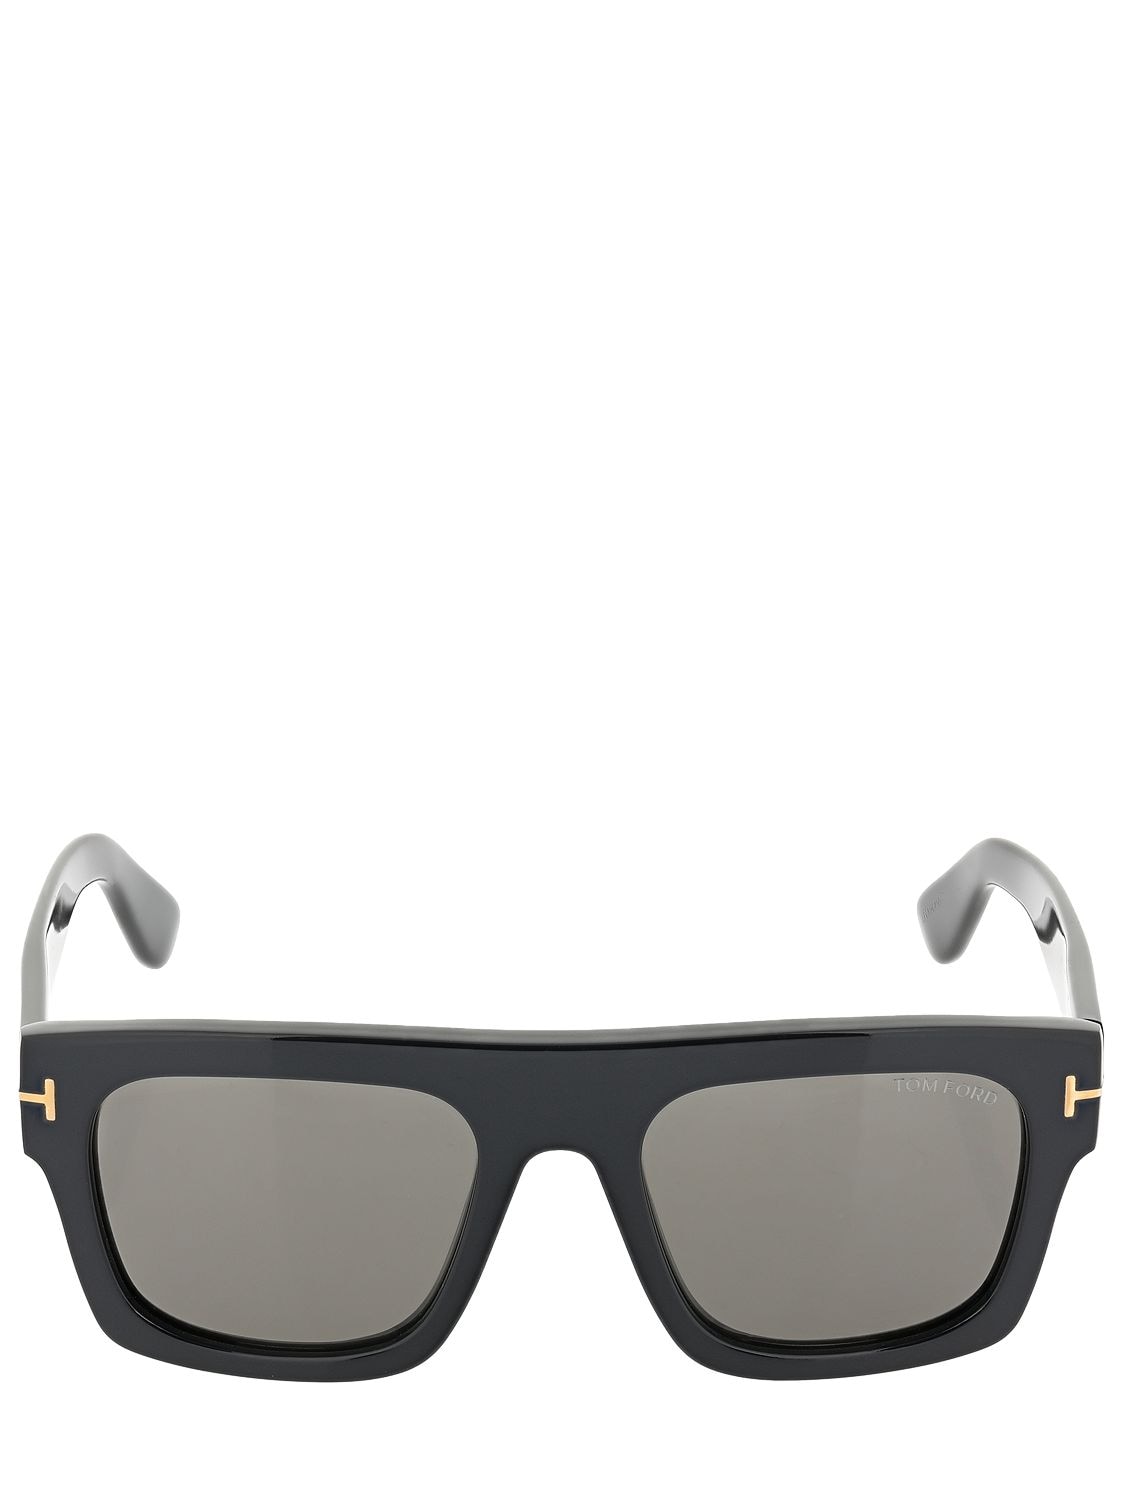 Tom Ford Fausto M Ft0711 01a Square Sunglasses In Black,smoke